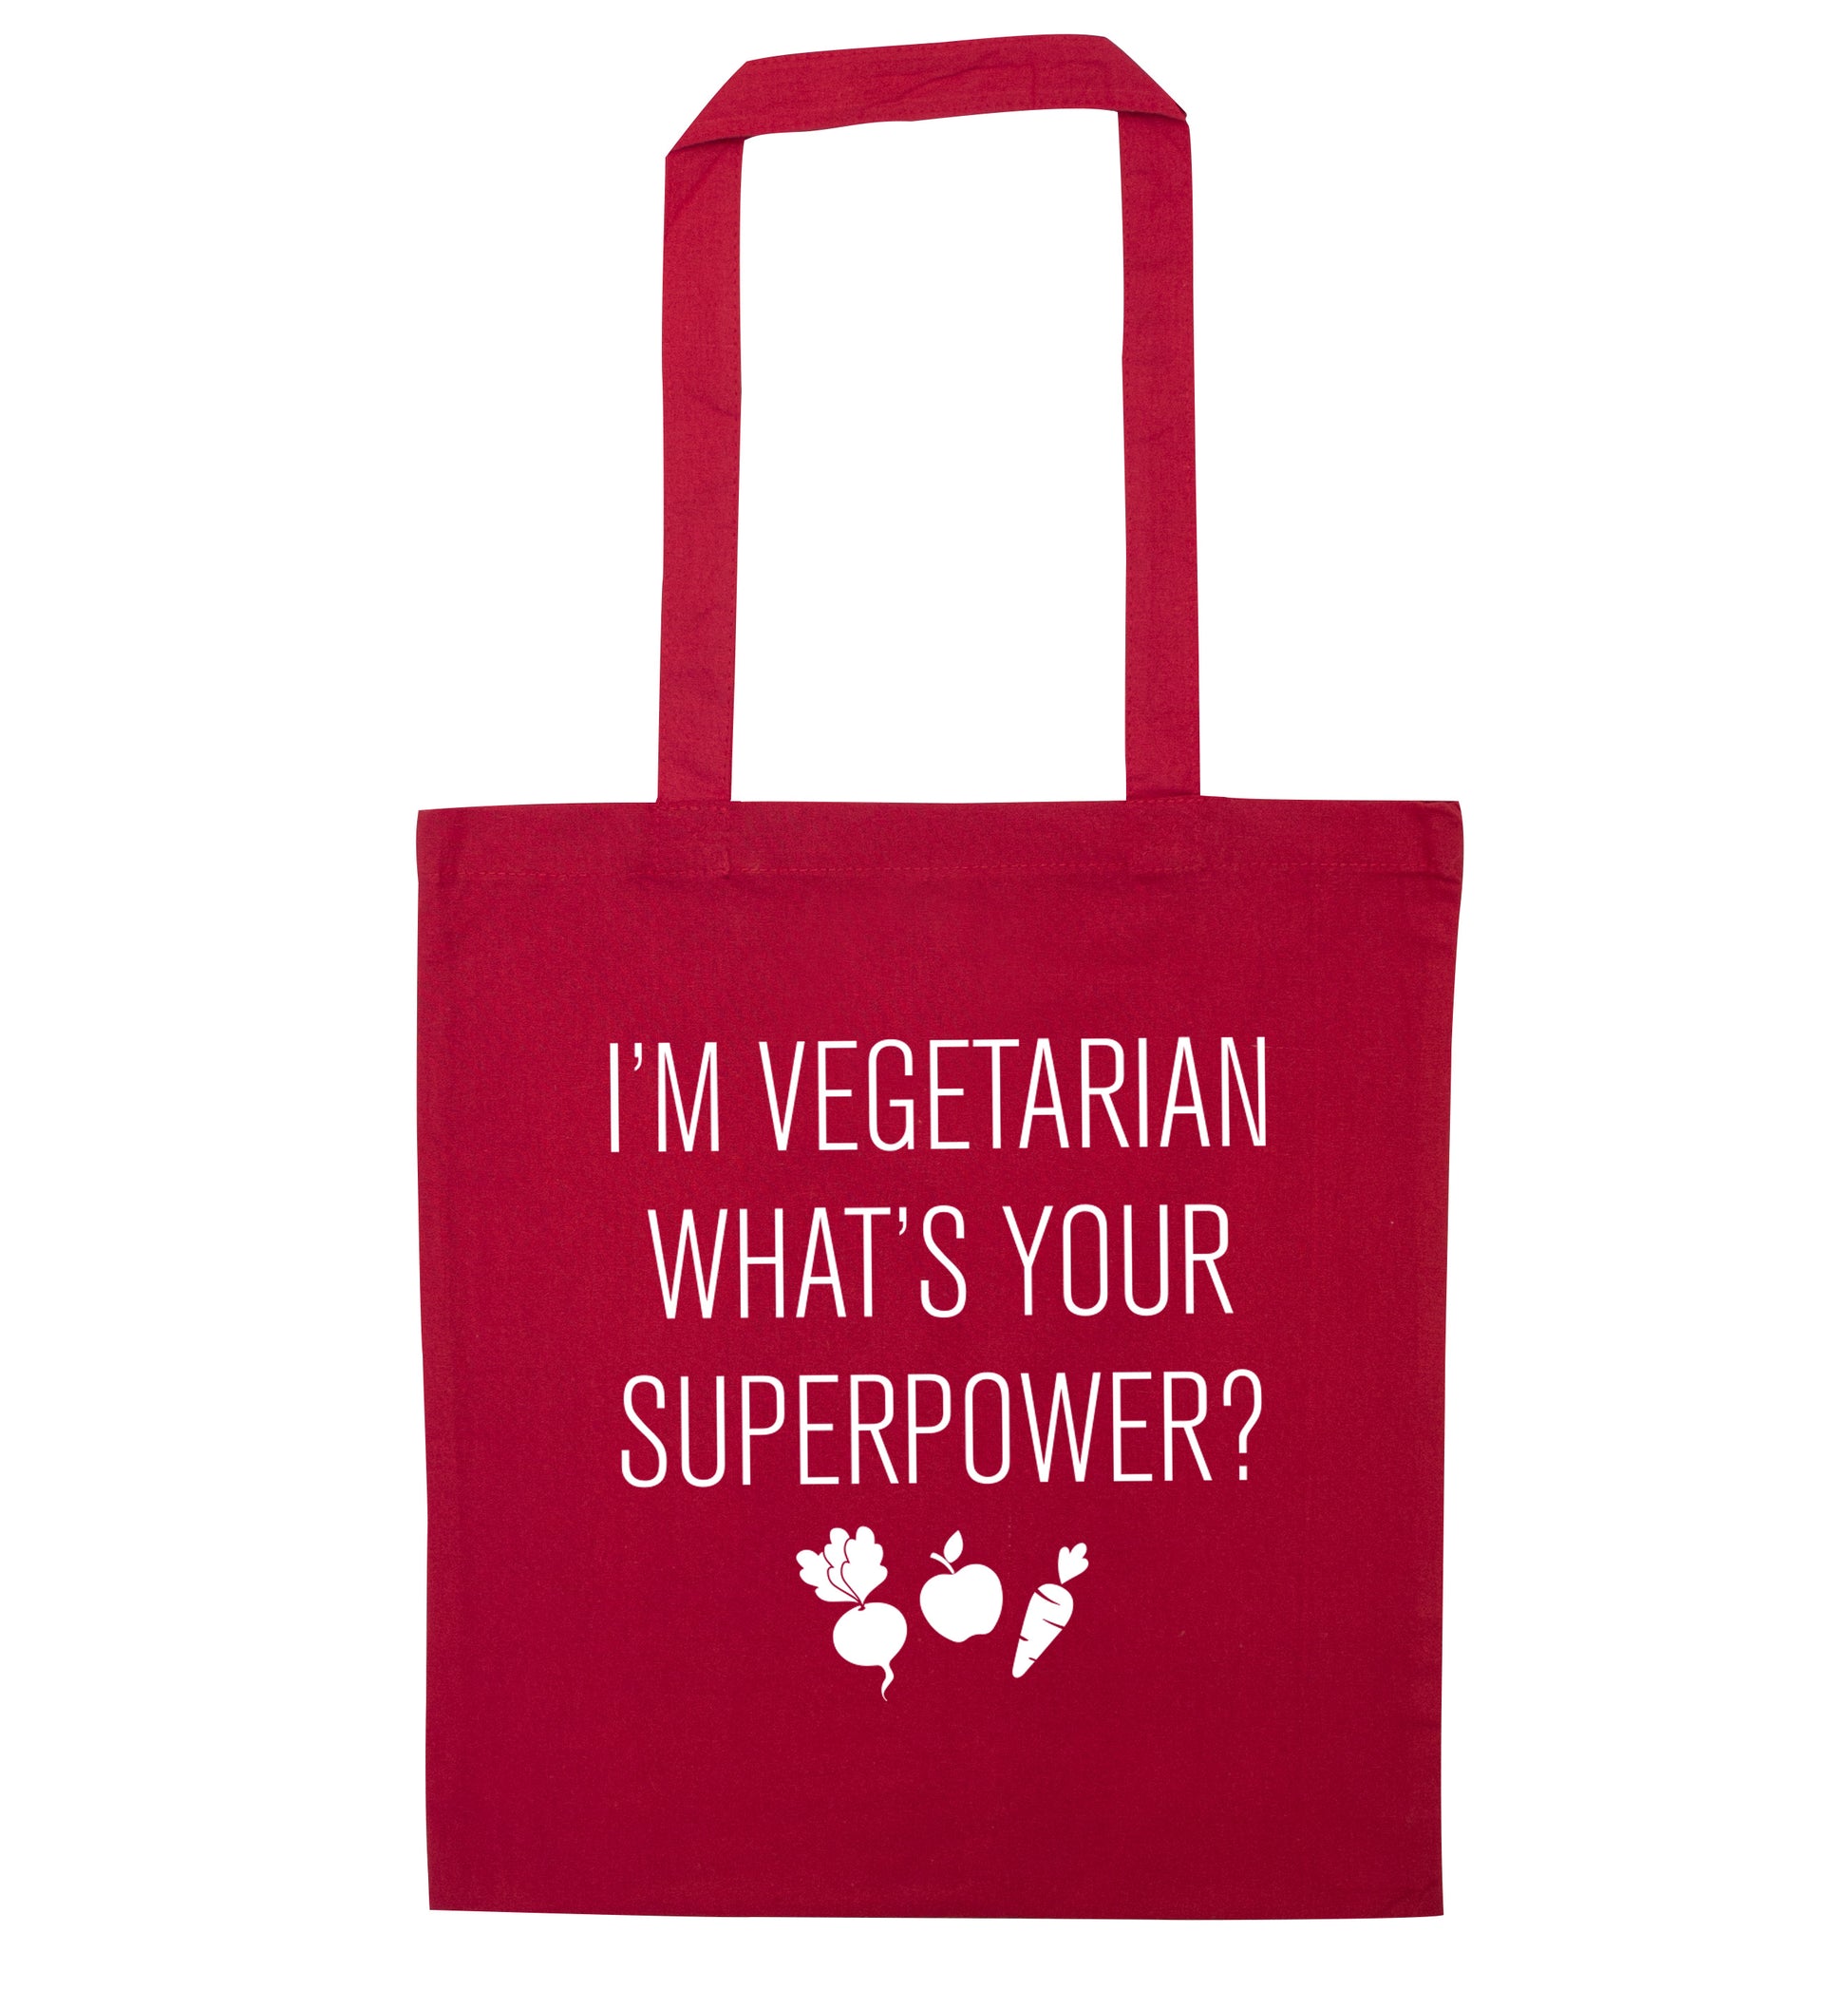 I'm vegetarian what's your superpower? red tote bag